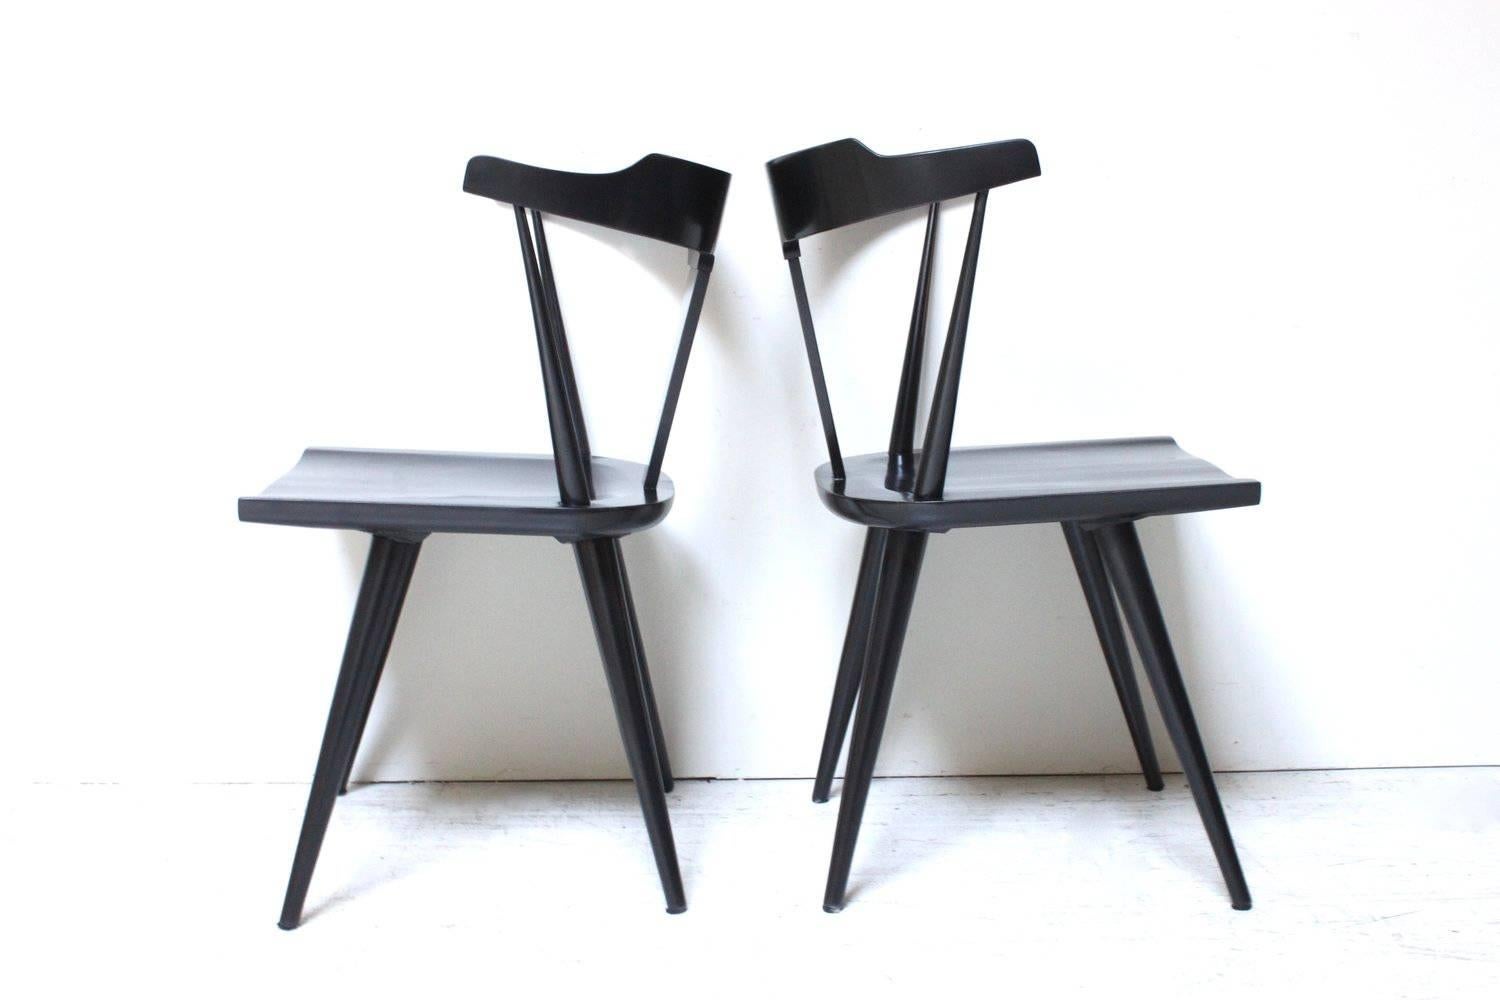 A beautiful pair of Planner group dining chairs in black lacquer.